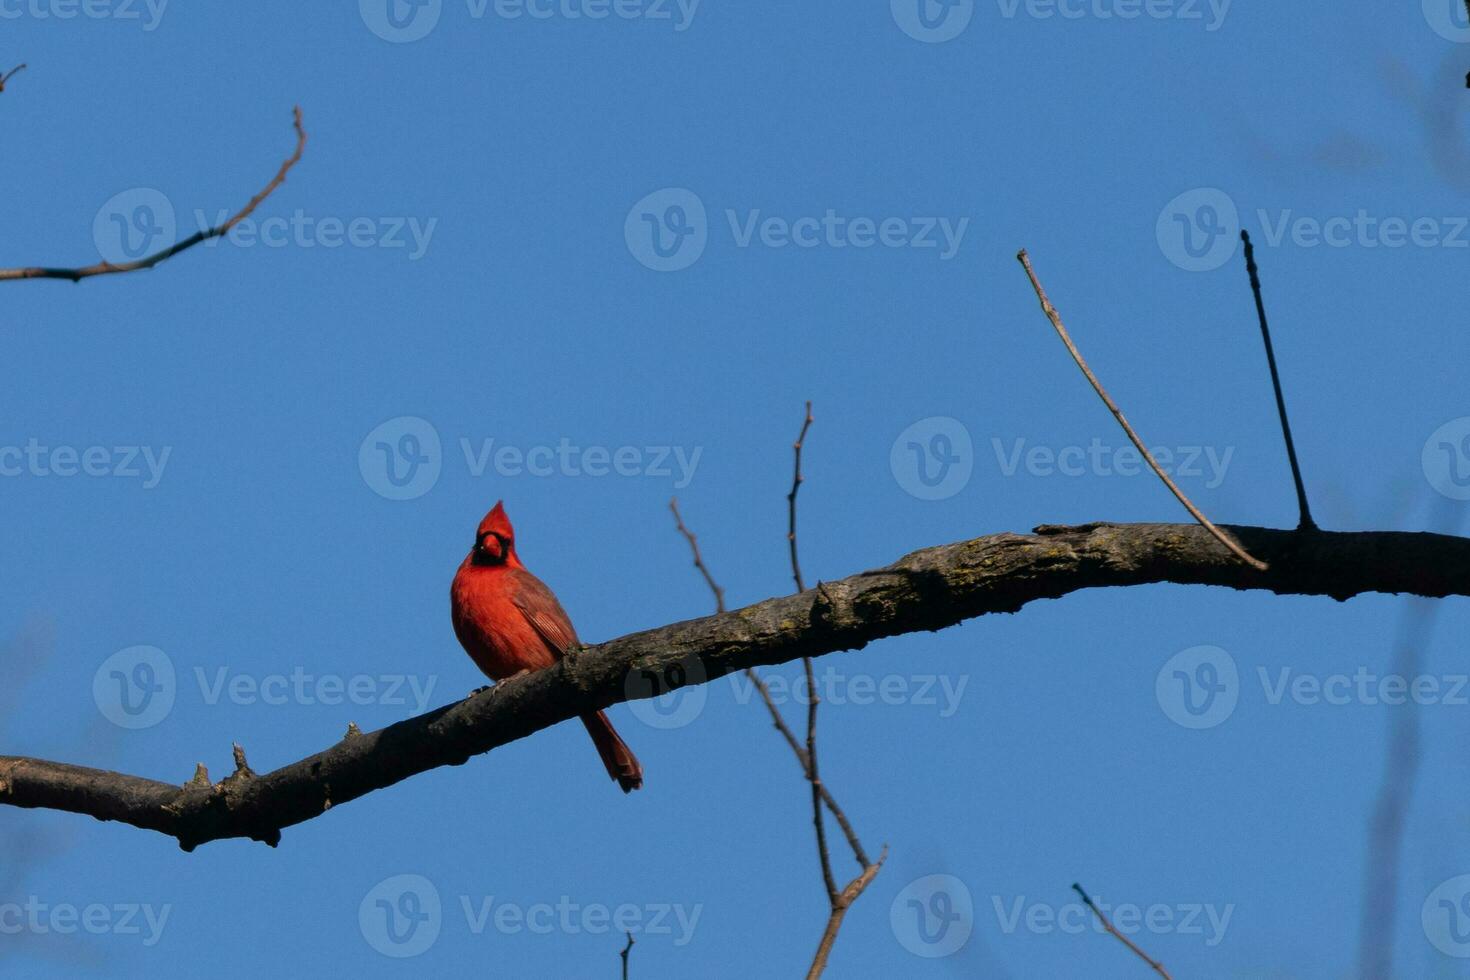 This beautiful red cardinal sat perched on the branch of this tree. The bright red body of the bird stands out from the bare brown branch. There are no leaves on this limb due to the winter season. photo